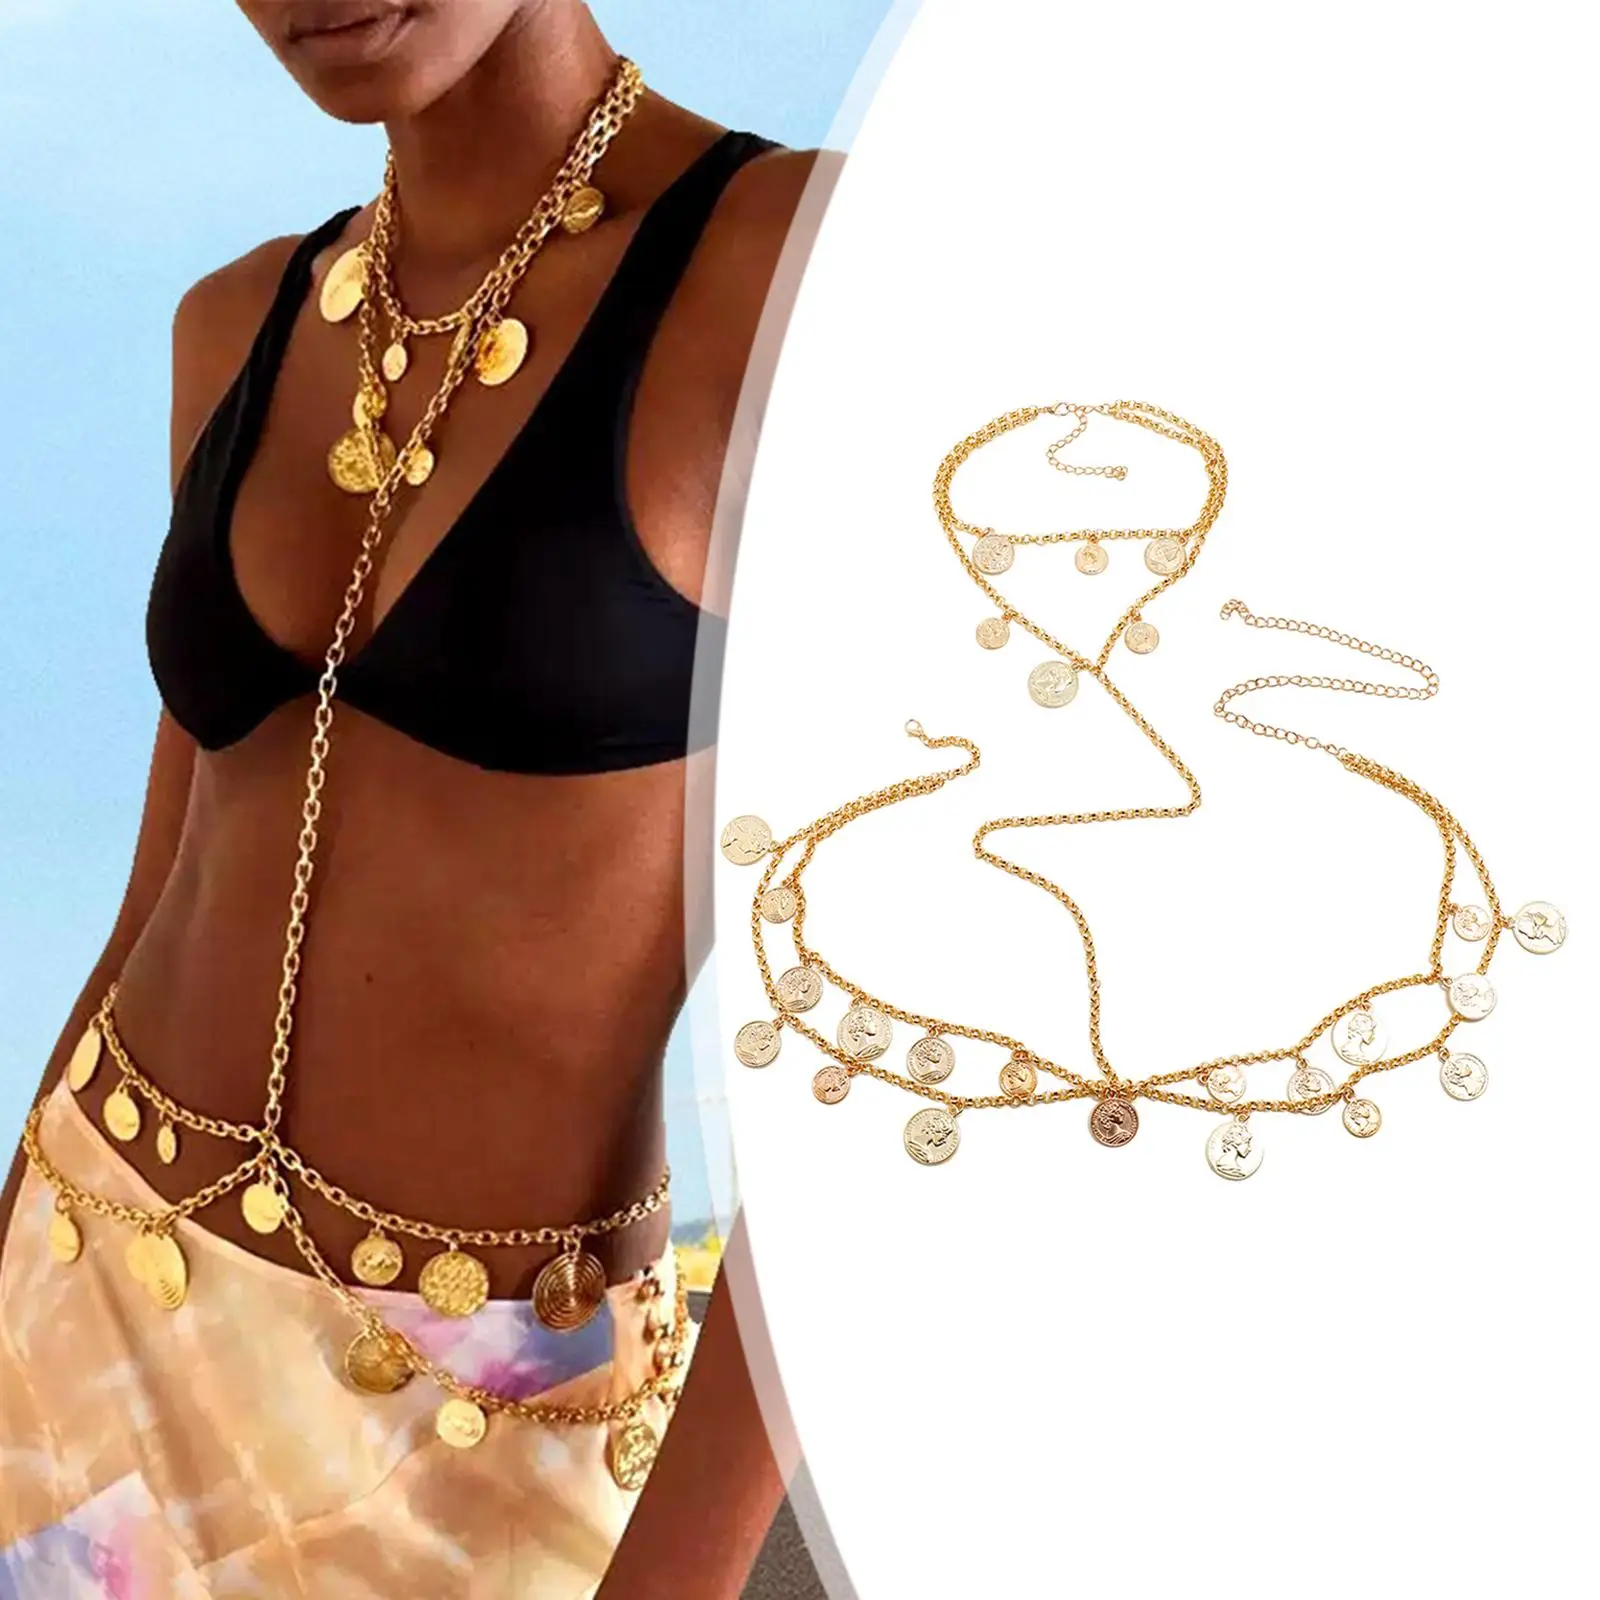 Body Chain Jewelry Multi-Level Alloy Golden Coin Pendant Gold Waist Chain Necklace for Beach Party Gift Girls Women